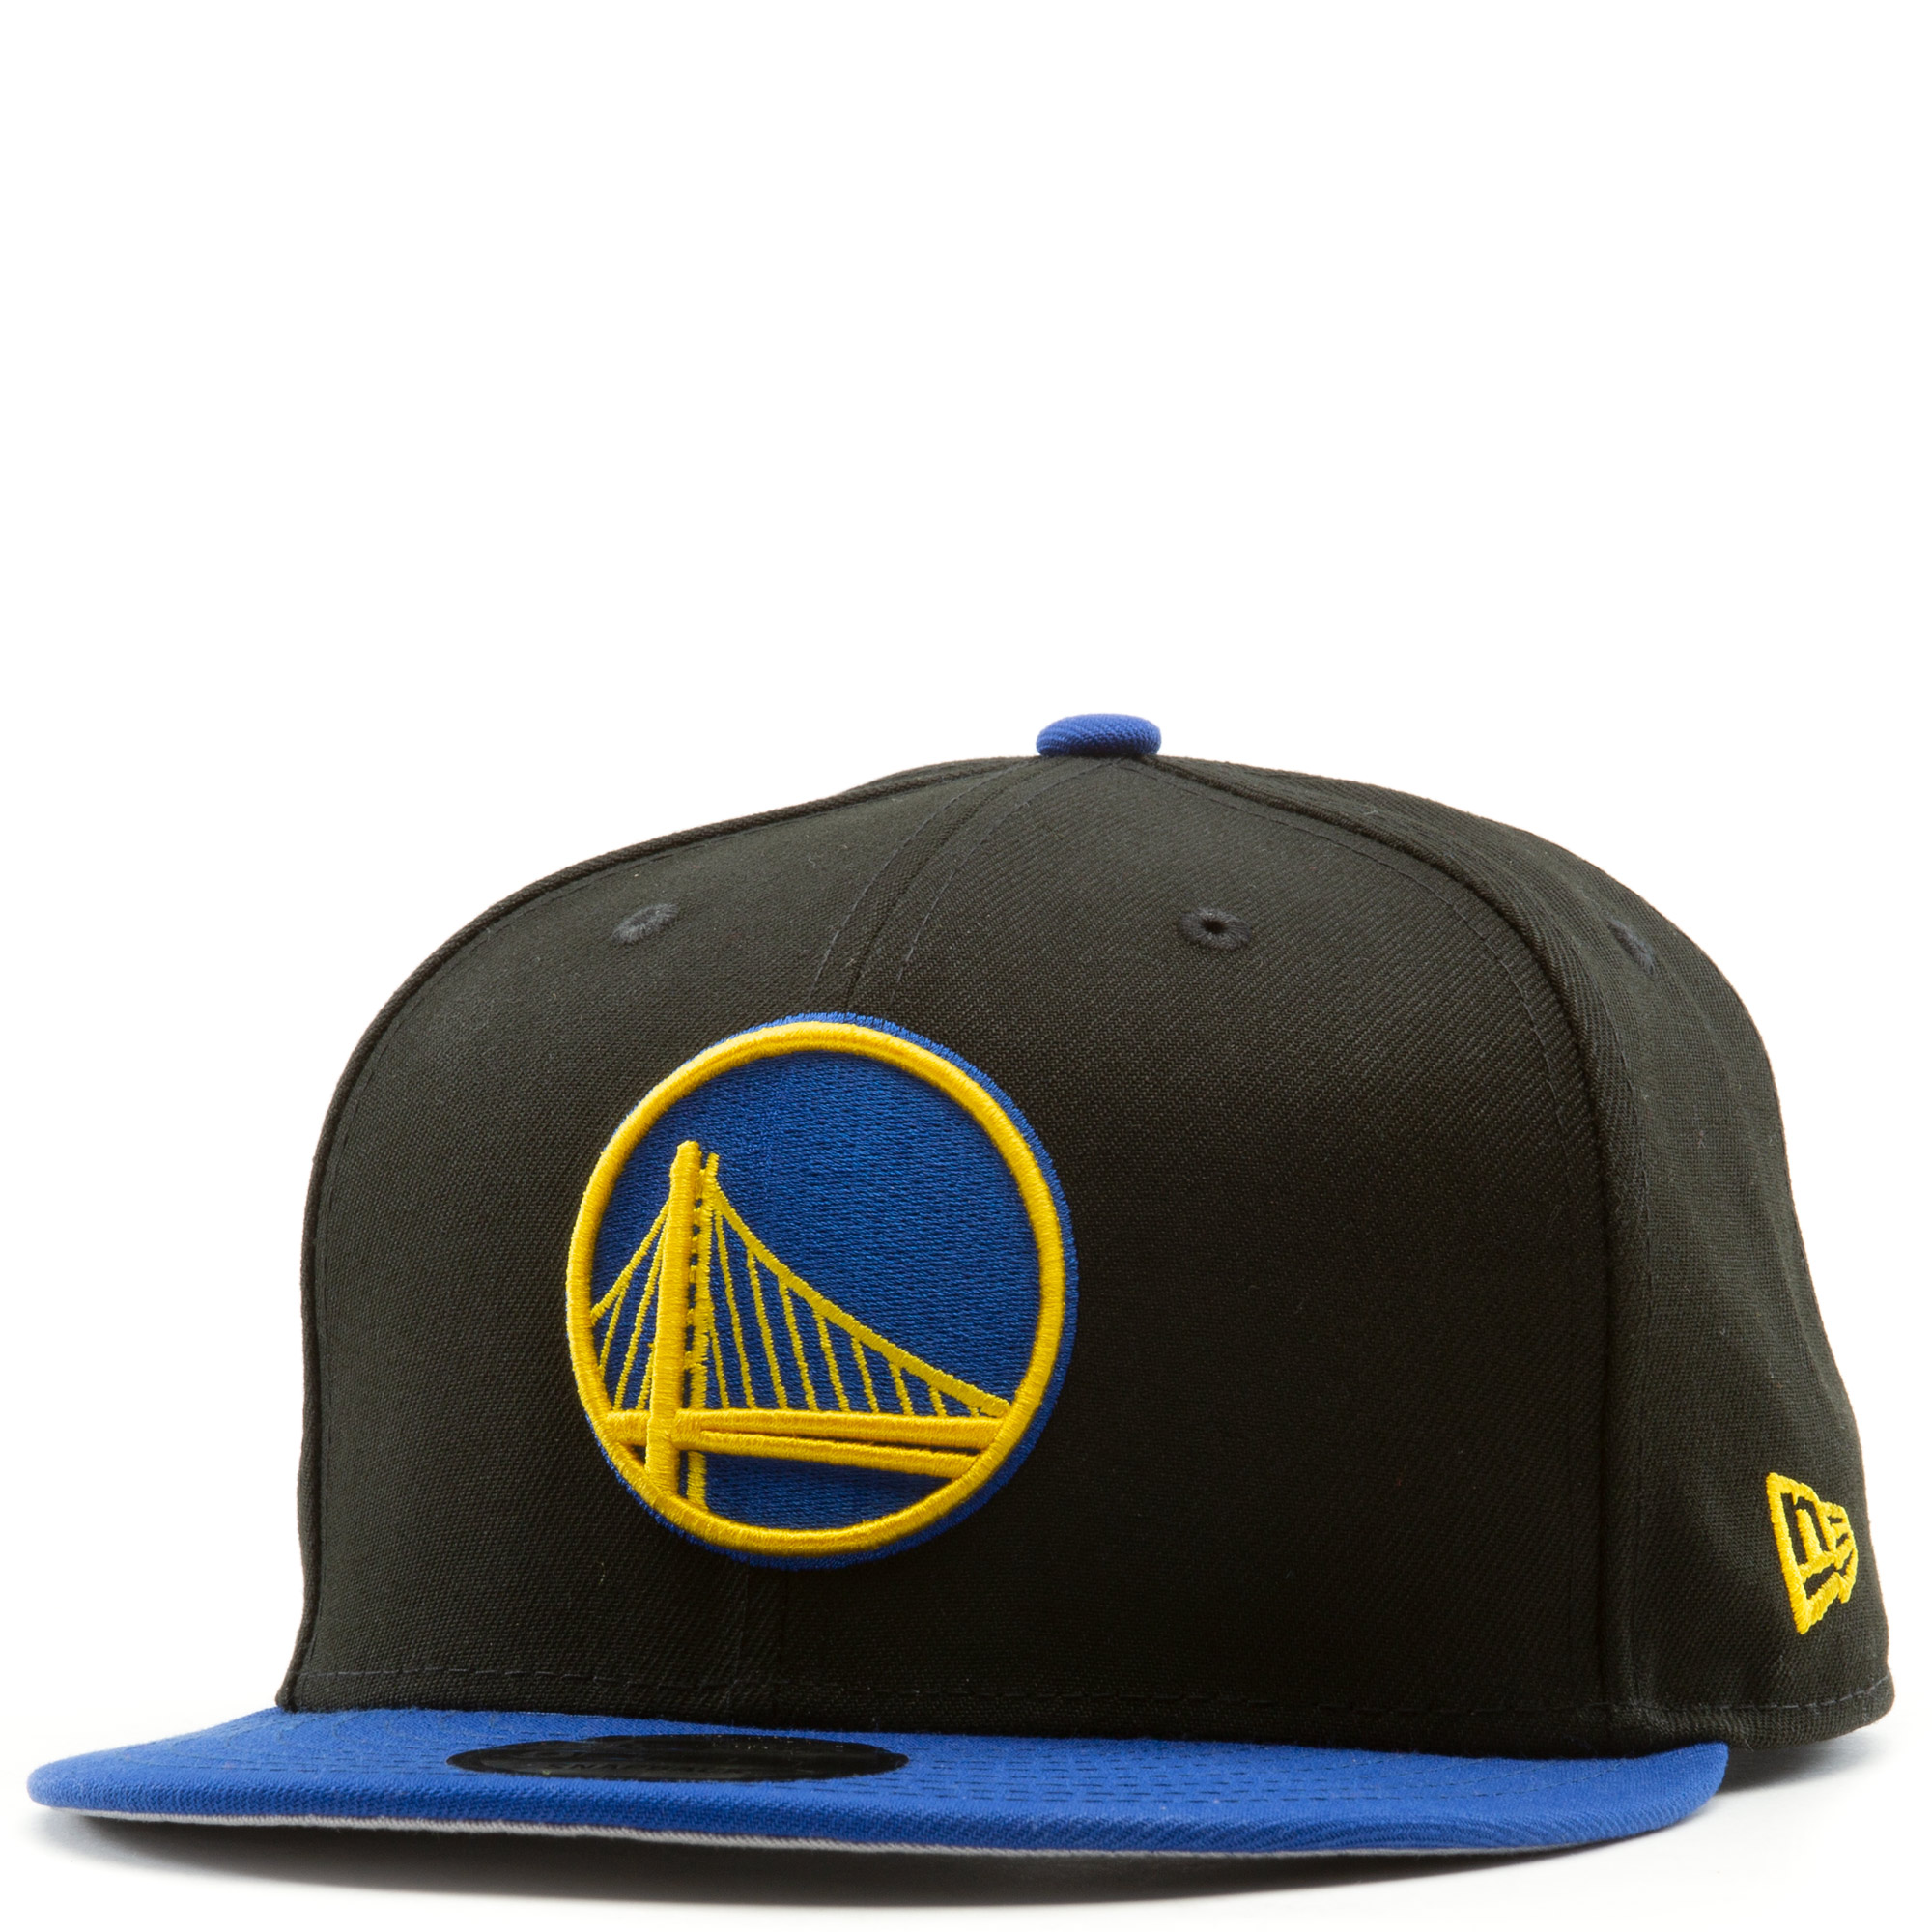 New Era, Accessories, Vintage Golden State Warriors All Black Gold Pin Hat  0s